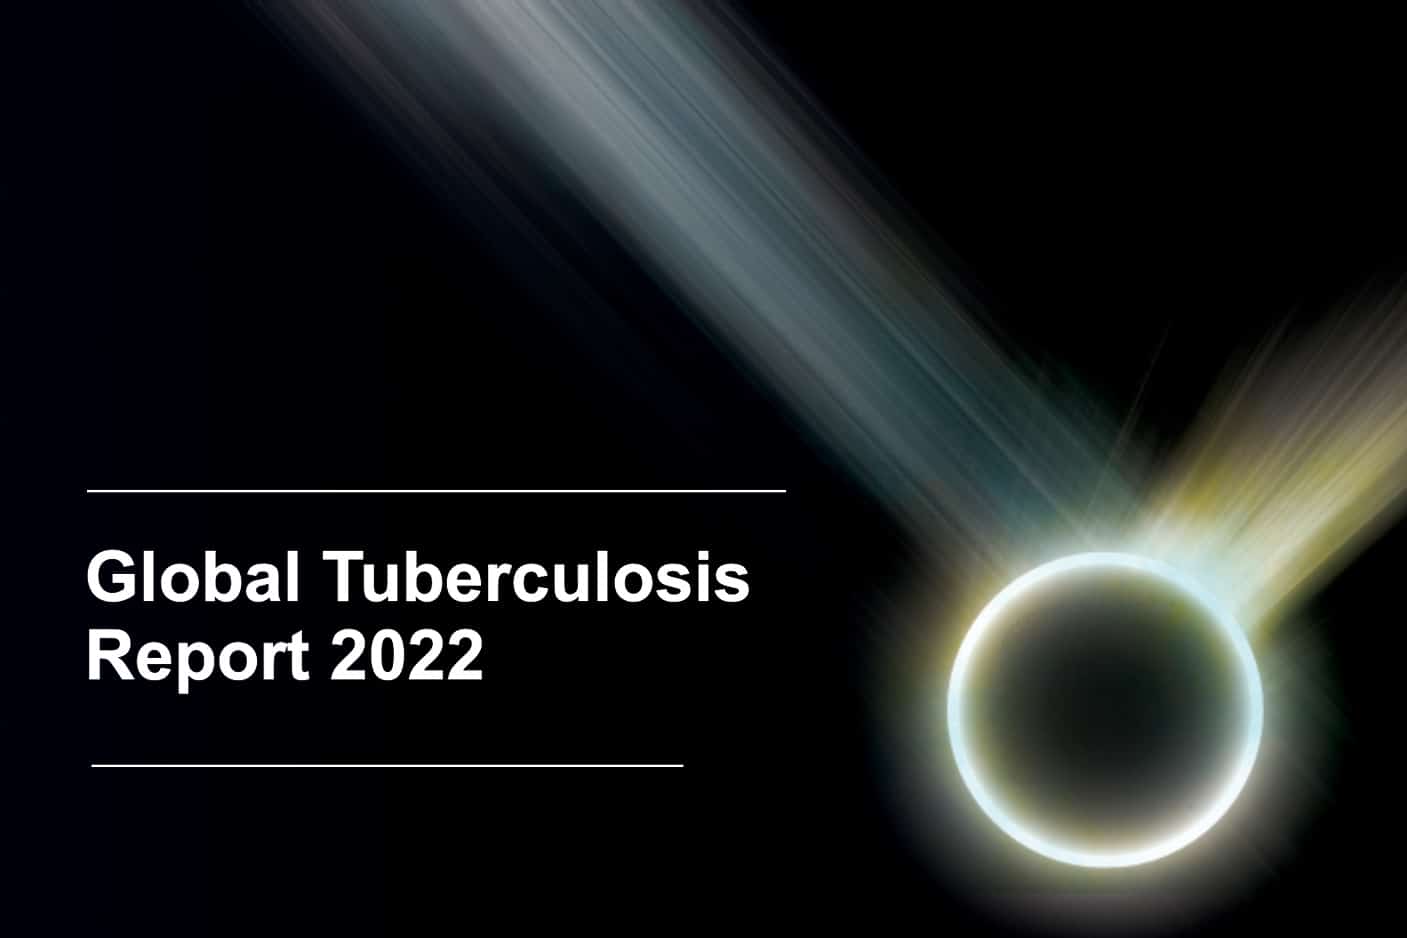 Global TB Report is out!